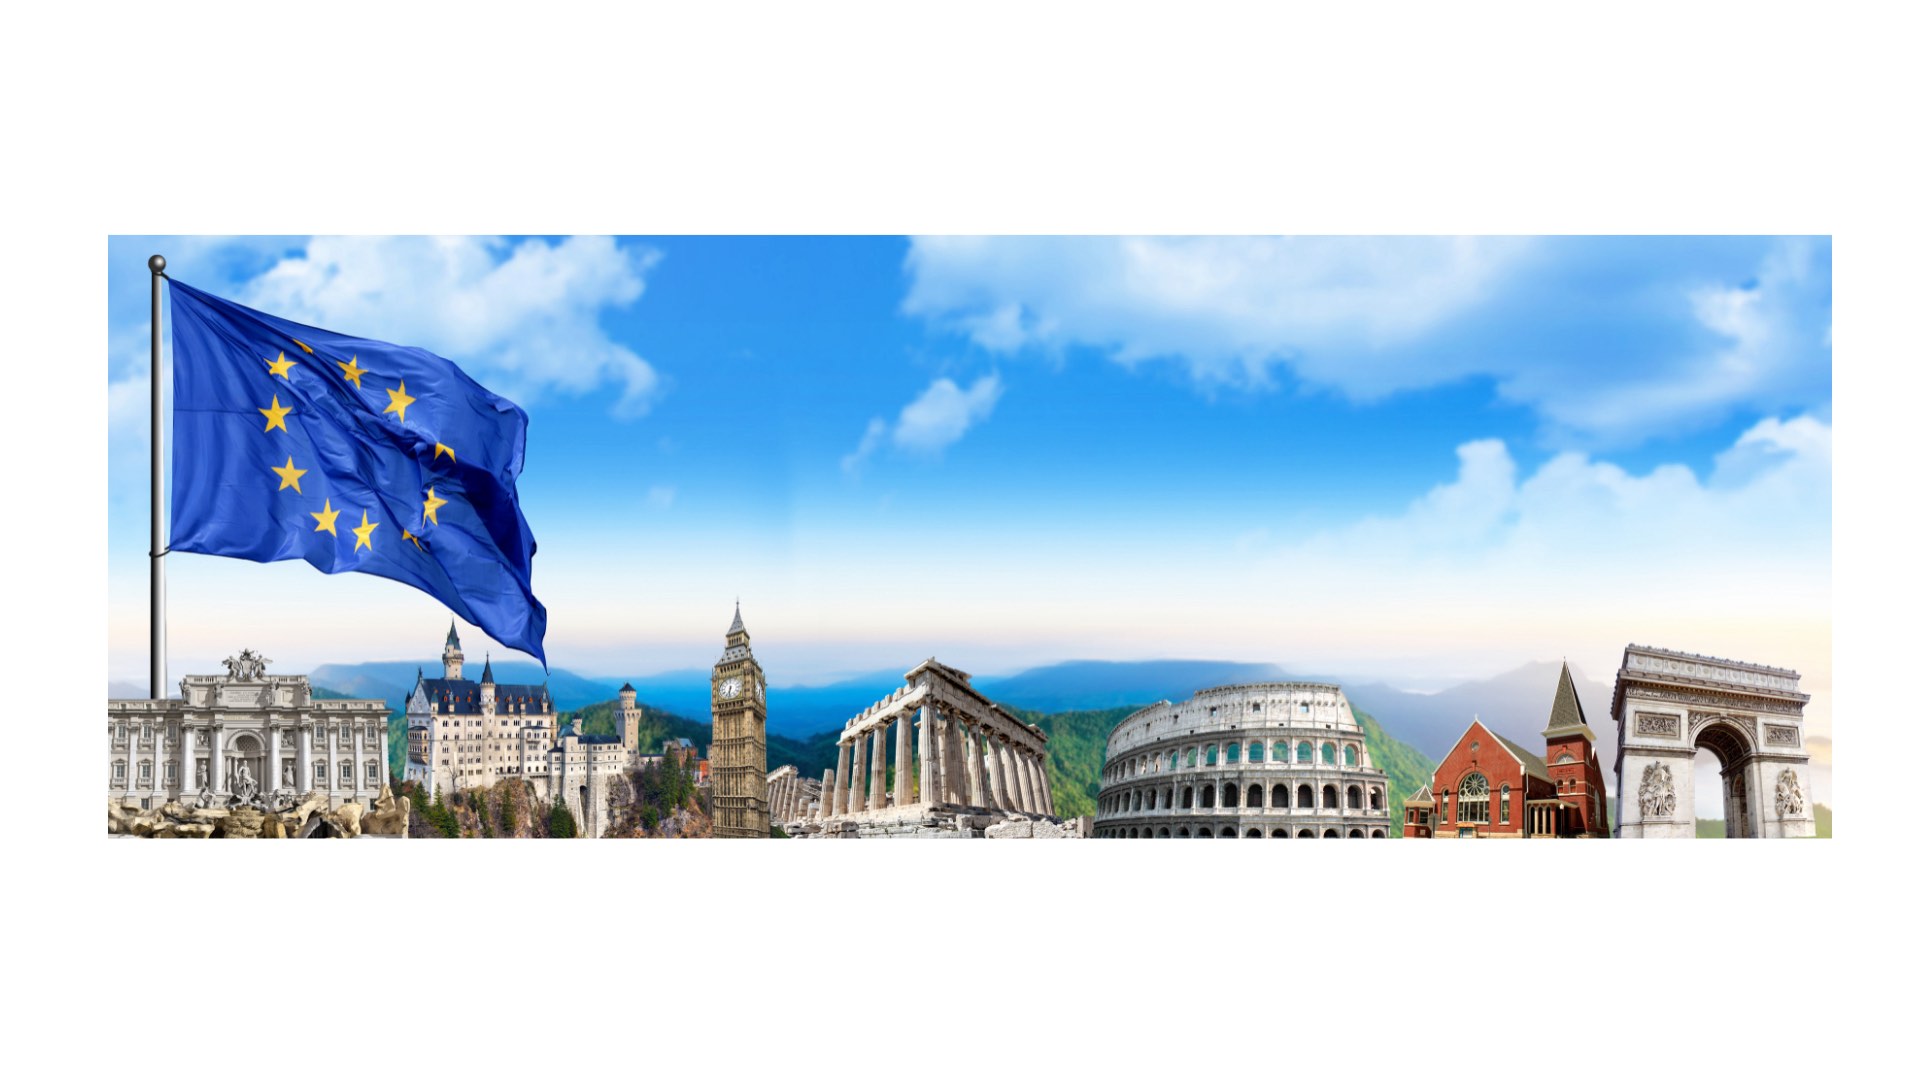 How to work in another EU country with a residence permit issued by another EU country?